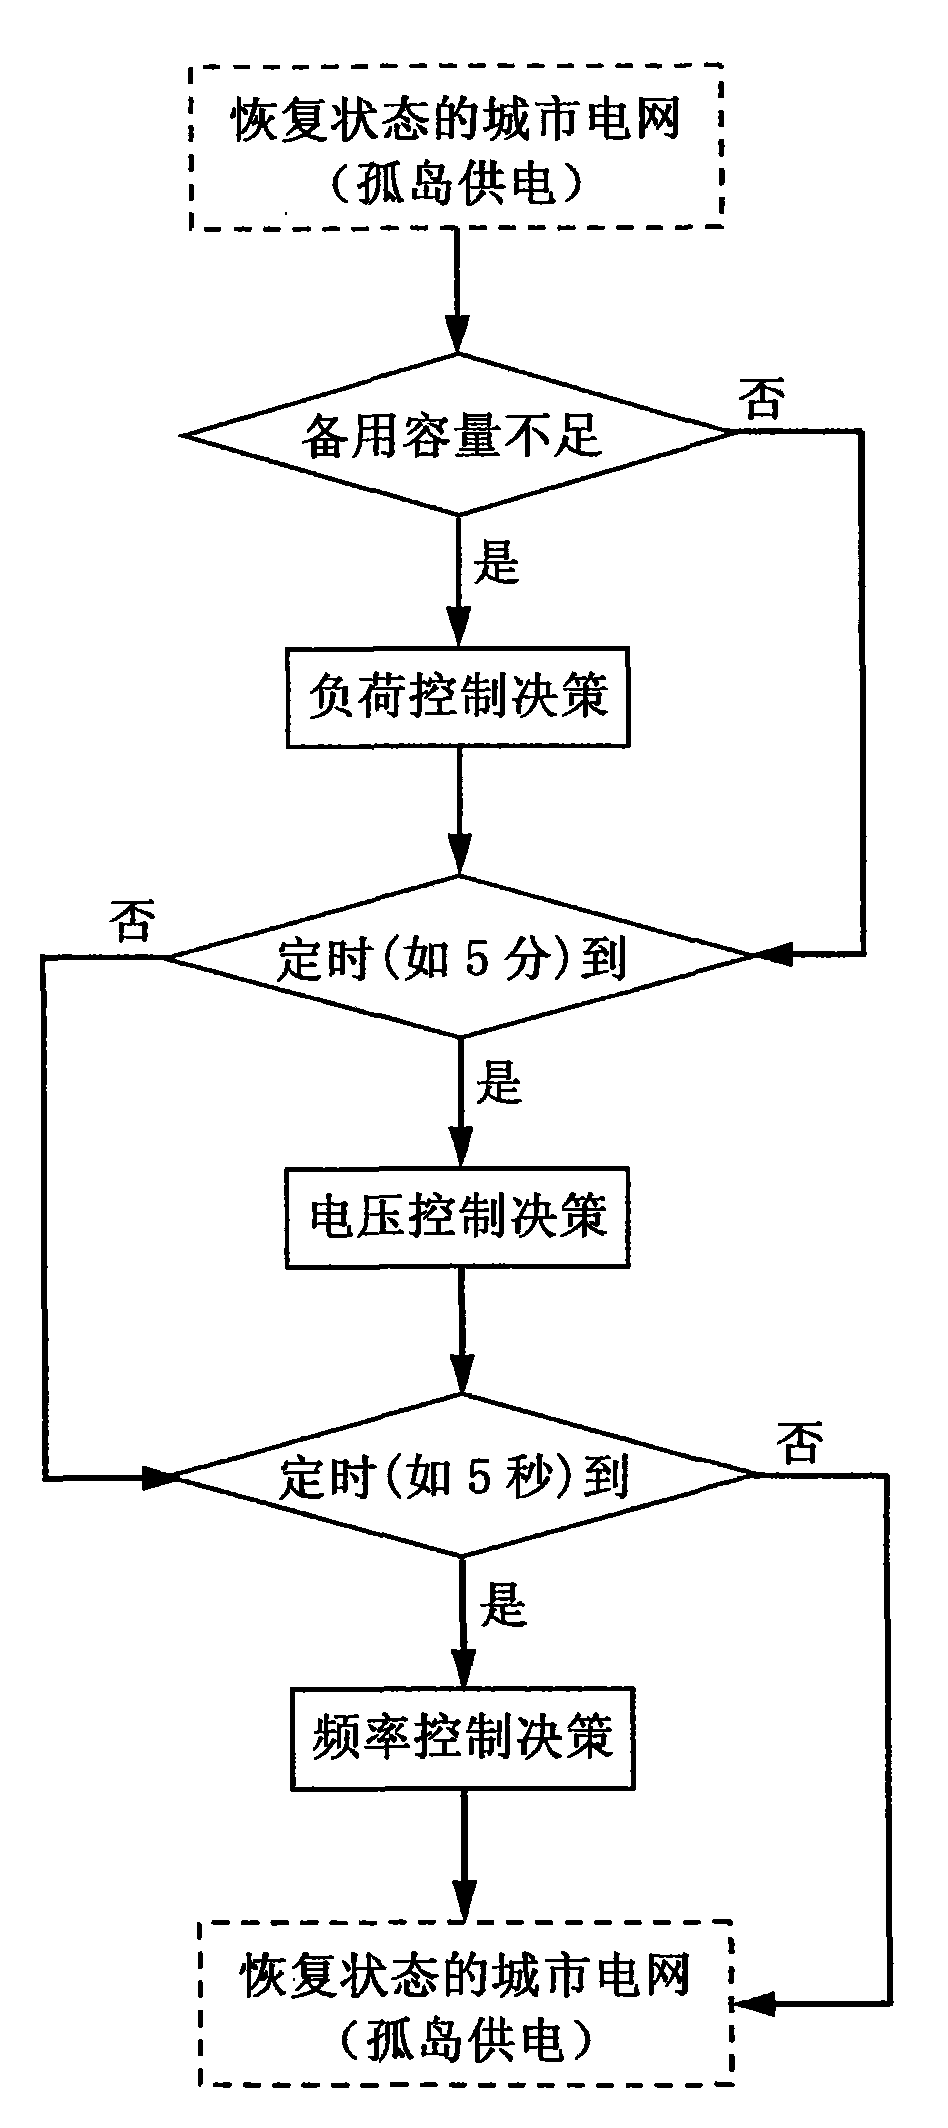 Self-healing control method for operation of urban distribution network